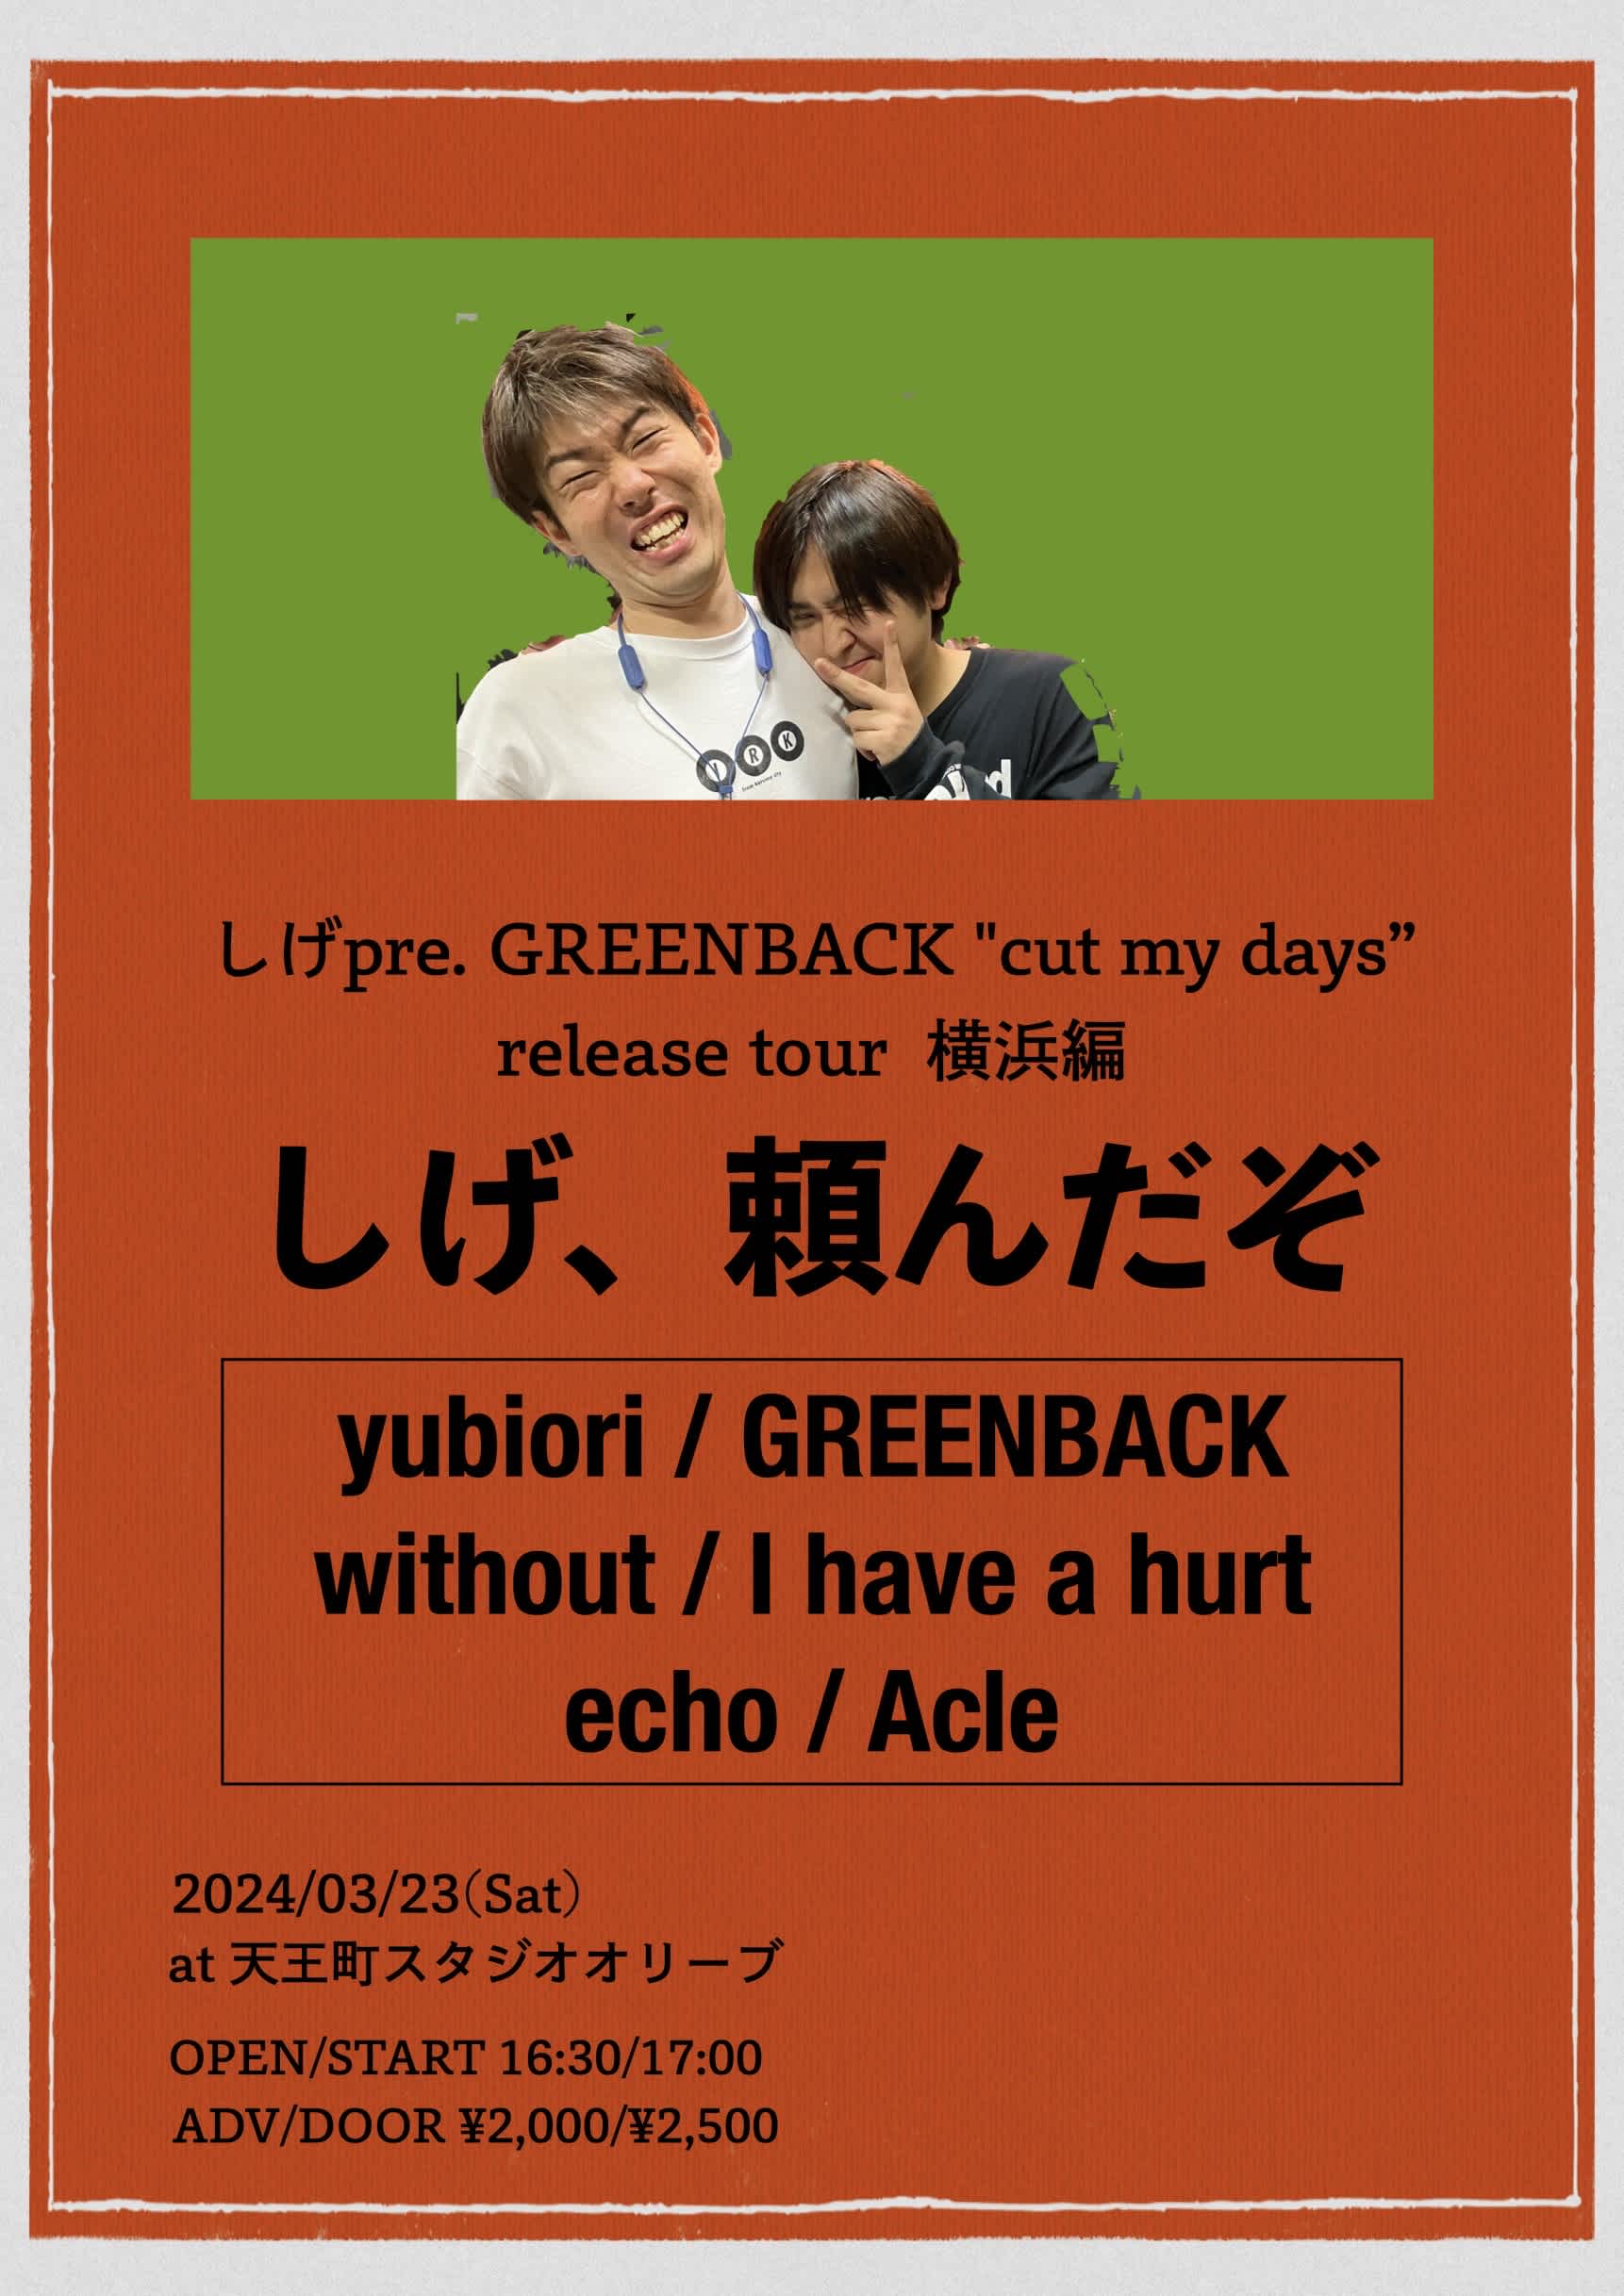 GREENBACK "cut my days" release tour 横浜編『しげ、頼んだぞ』のイメージ1